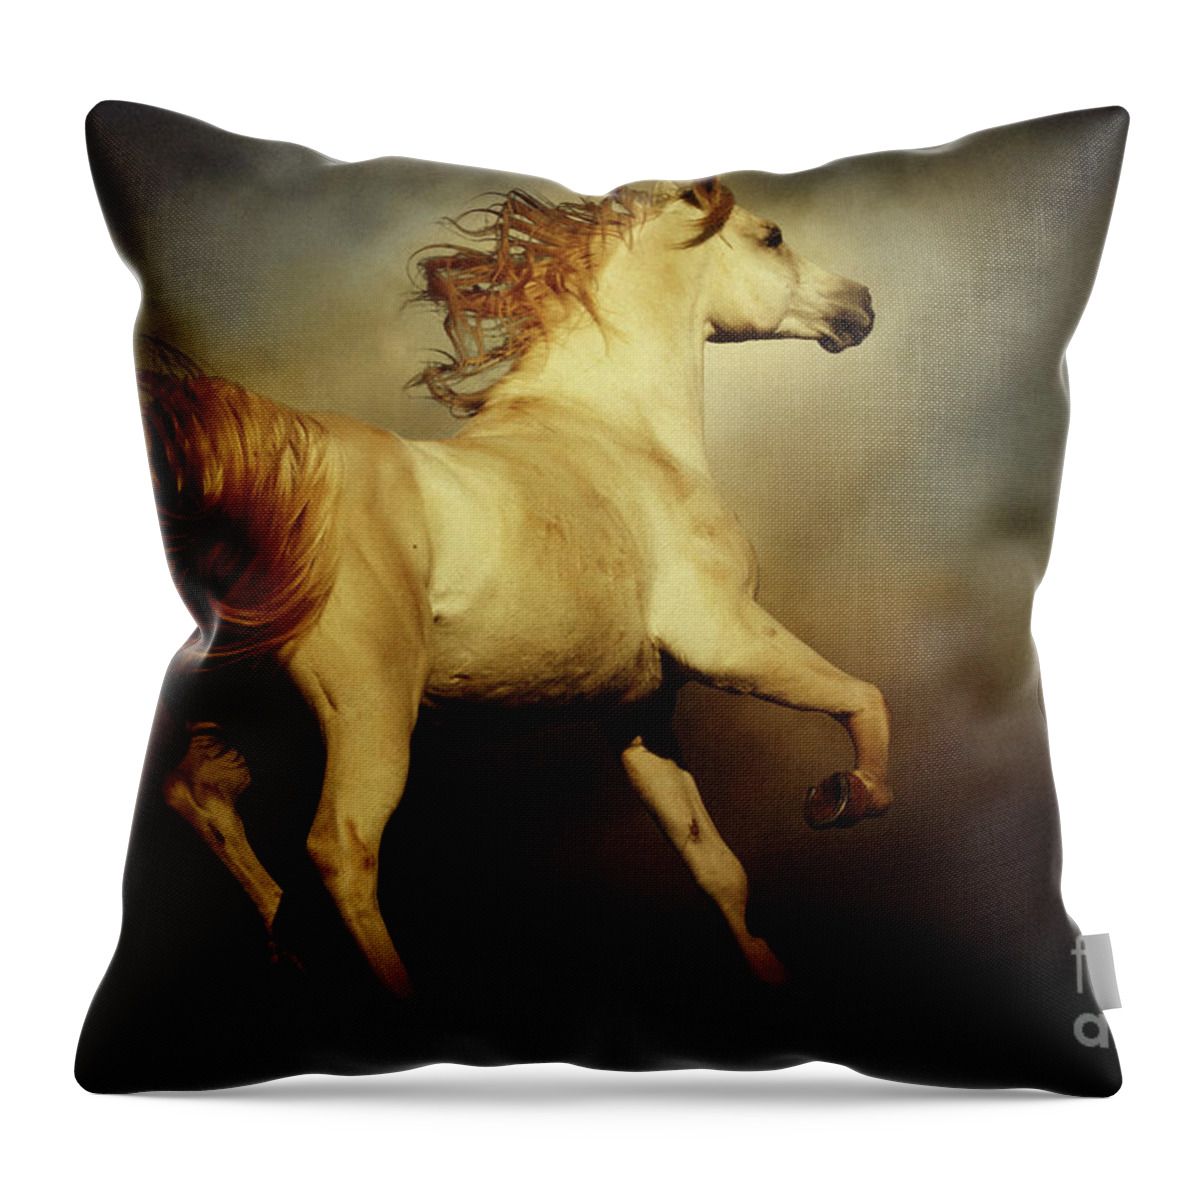 Horse Throw Pillow featuring the photograph Majestic Horse by Dimitar Hristov